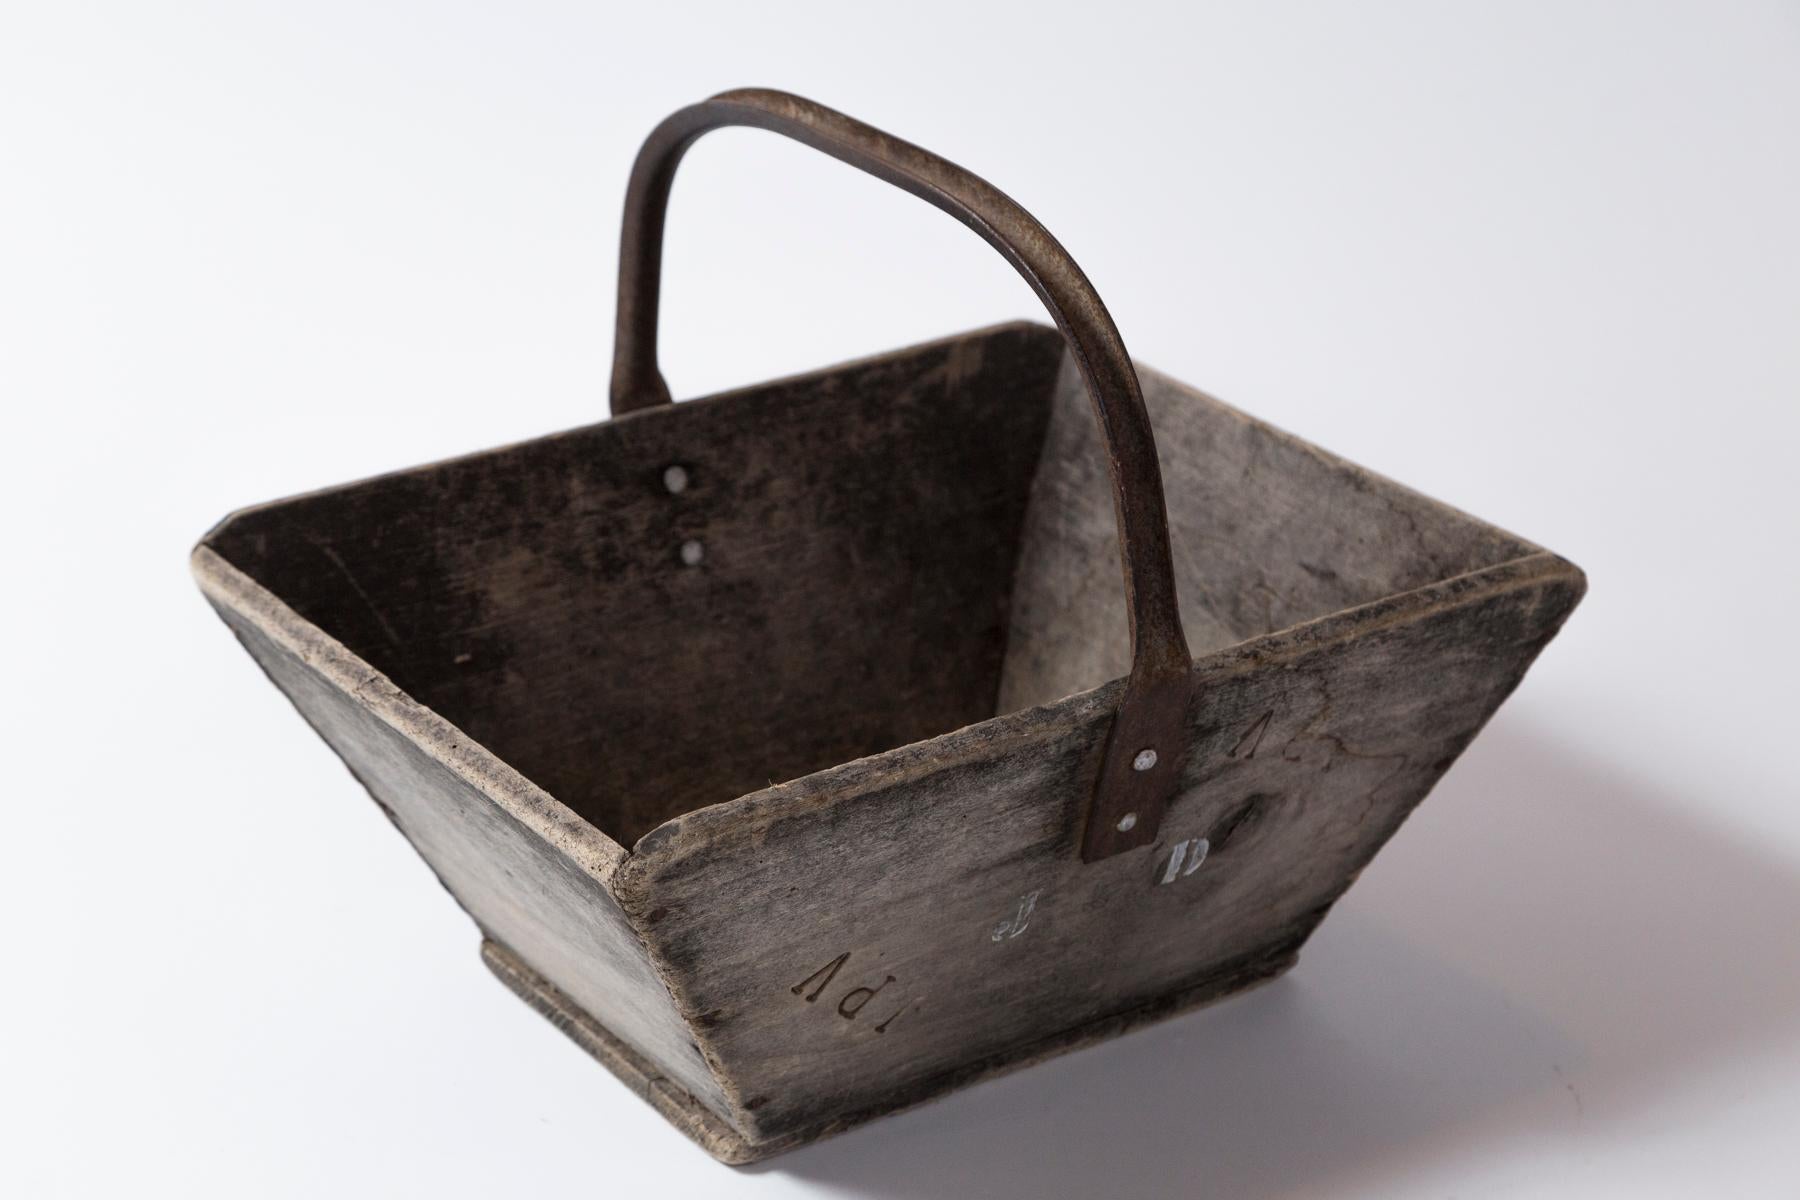 Hand-Crafted Antique French Garden Trug (Panier), early 20th Century For Sale